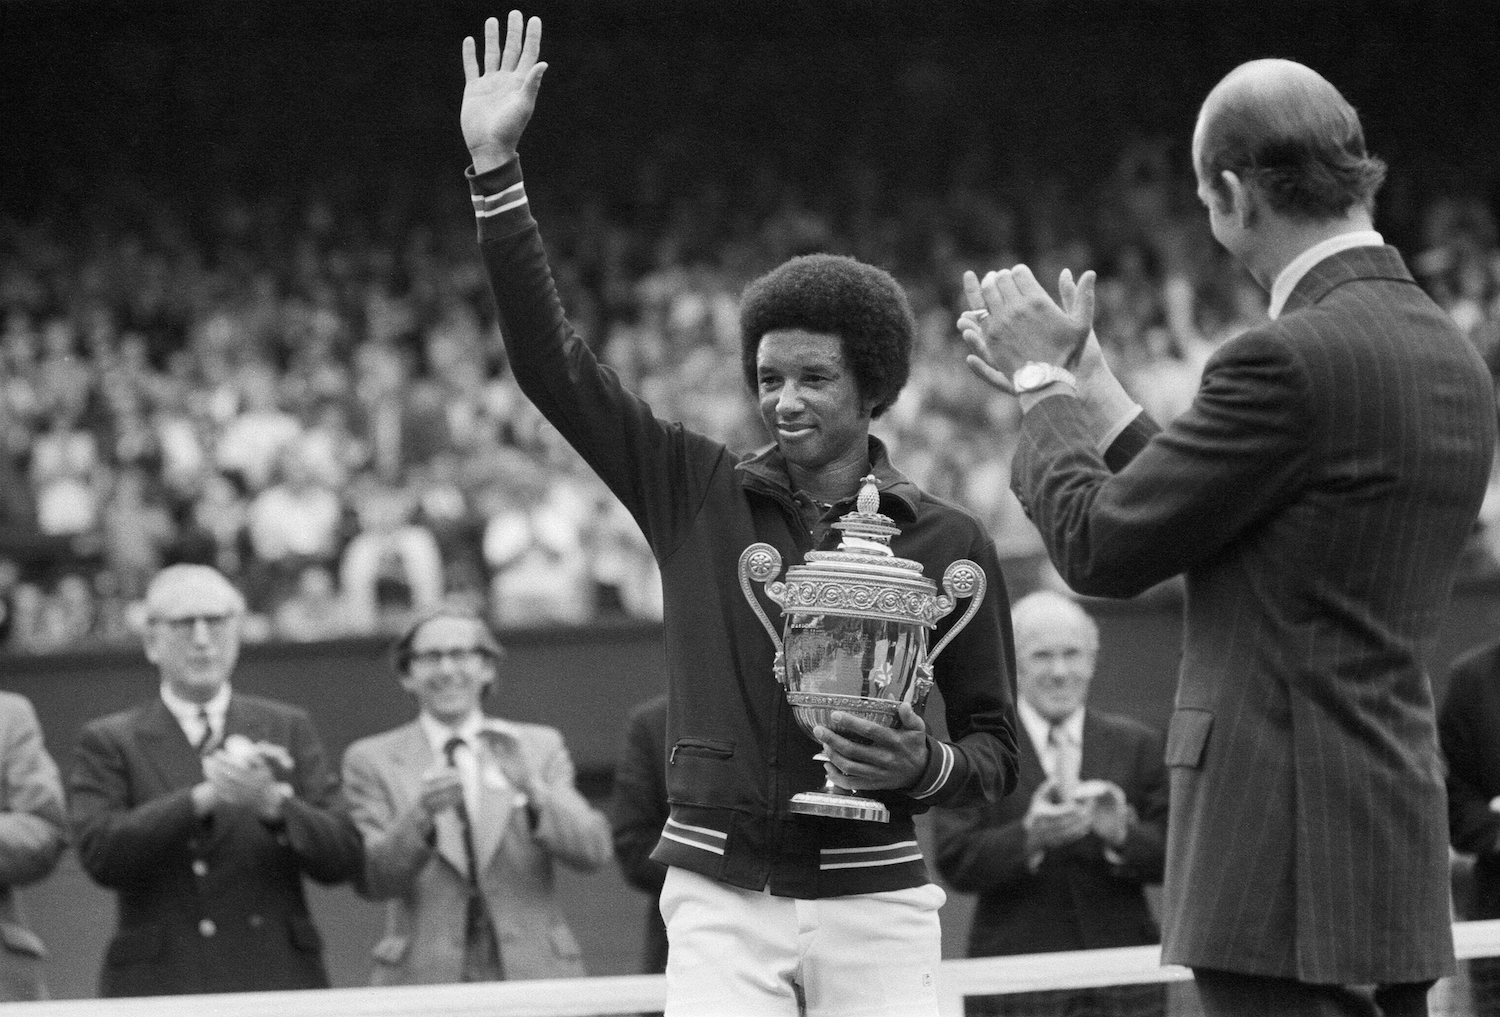 Tennis Great Arthur Ashe and His Tragic Death from AIDS